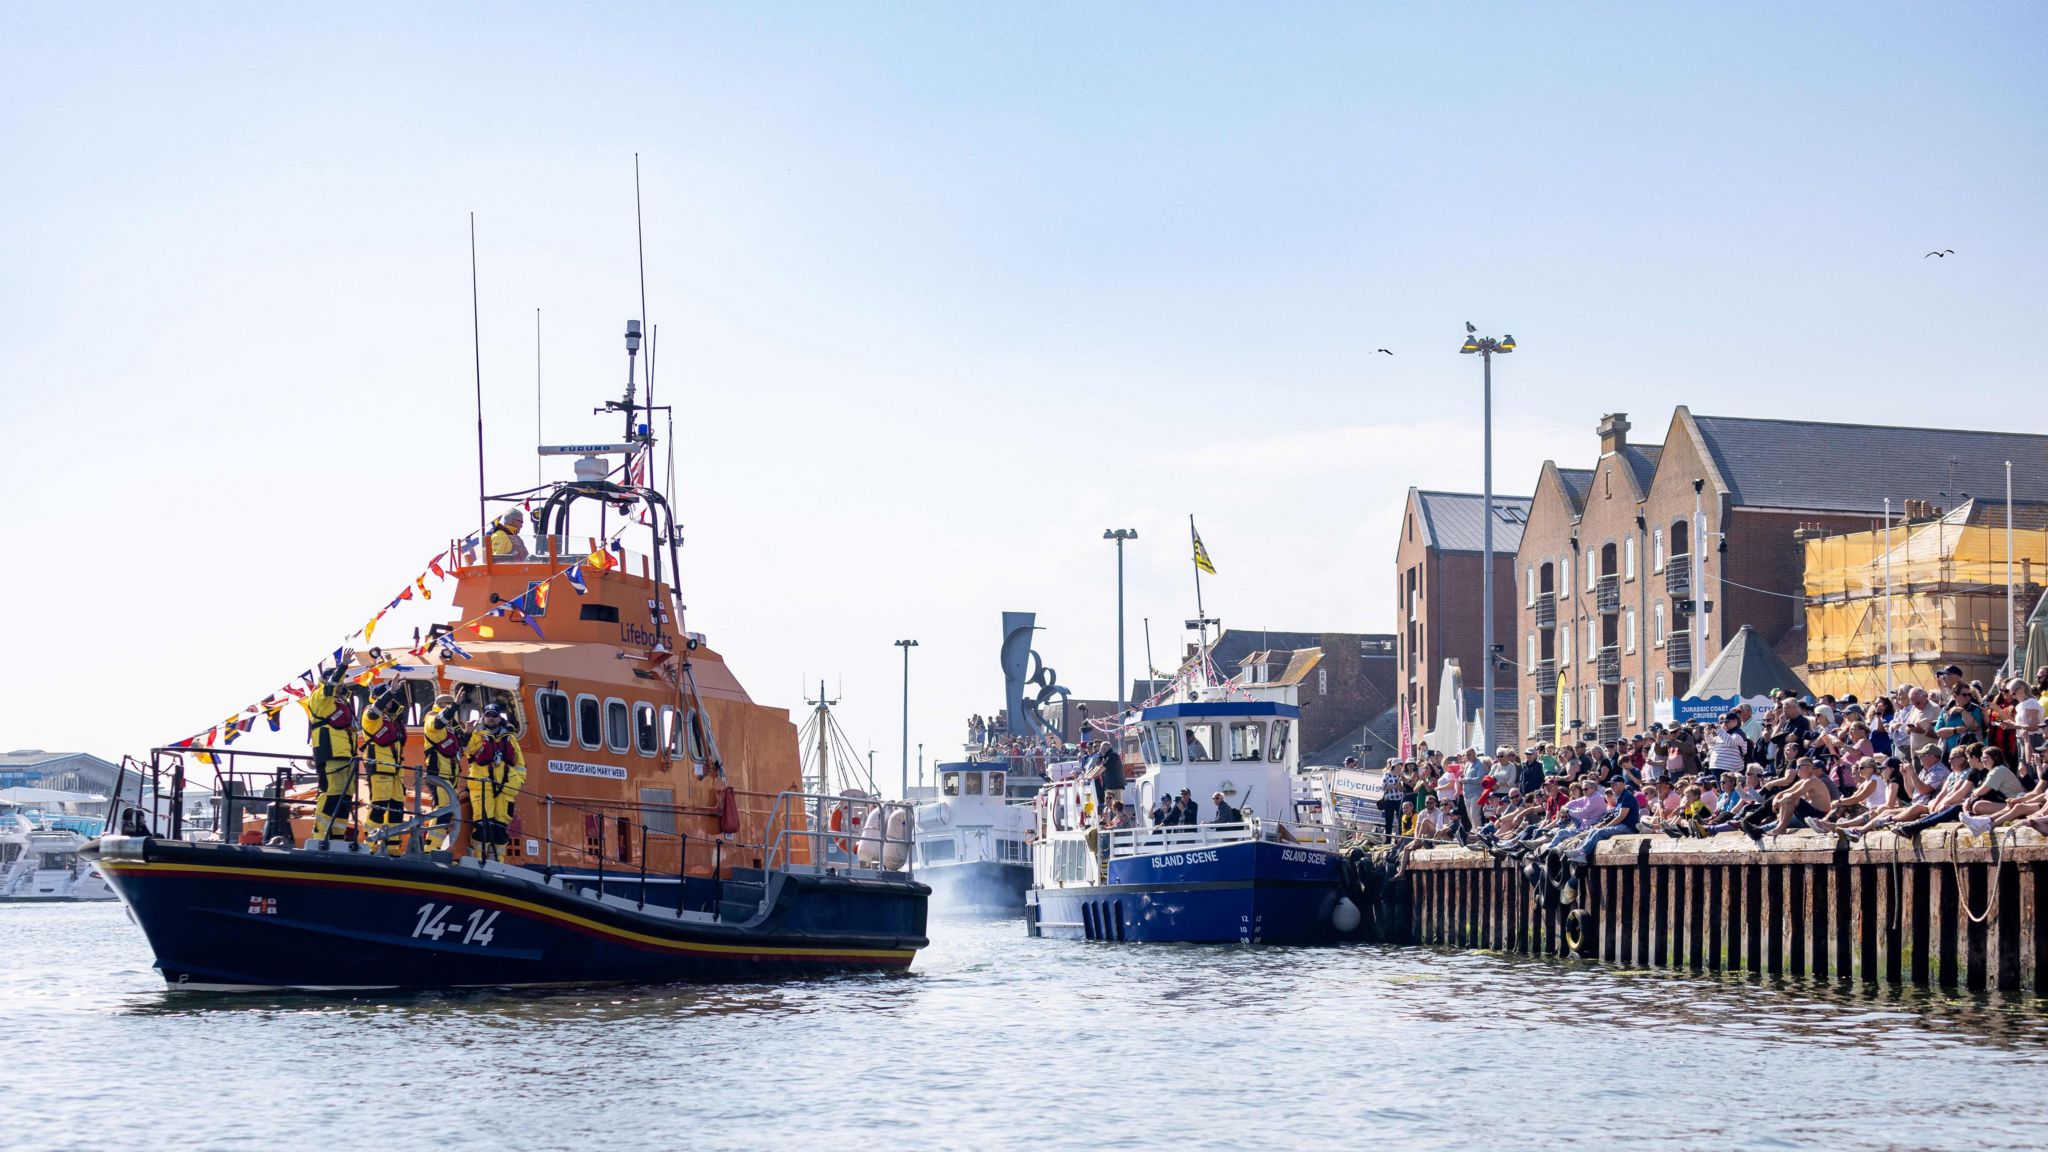 A Trent class all-weather lifeboat taking part in the flotilla as crowds gather Poole Quay.